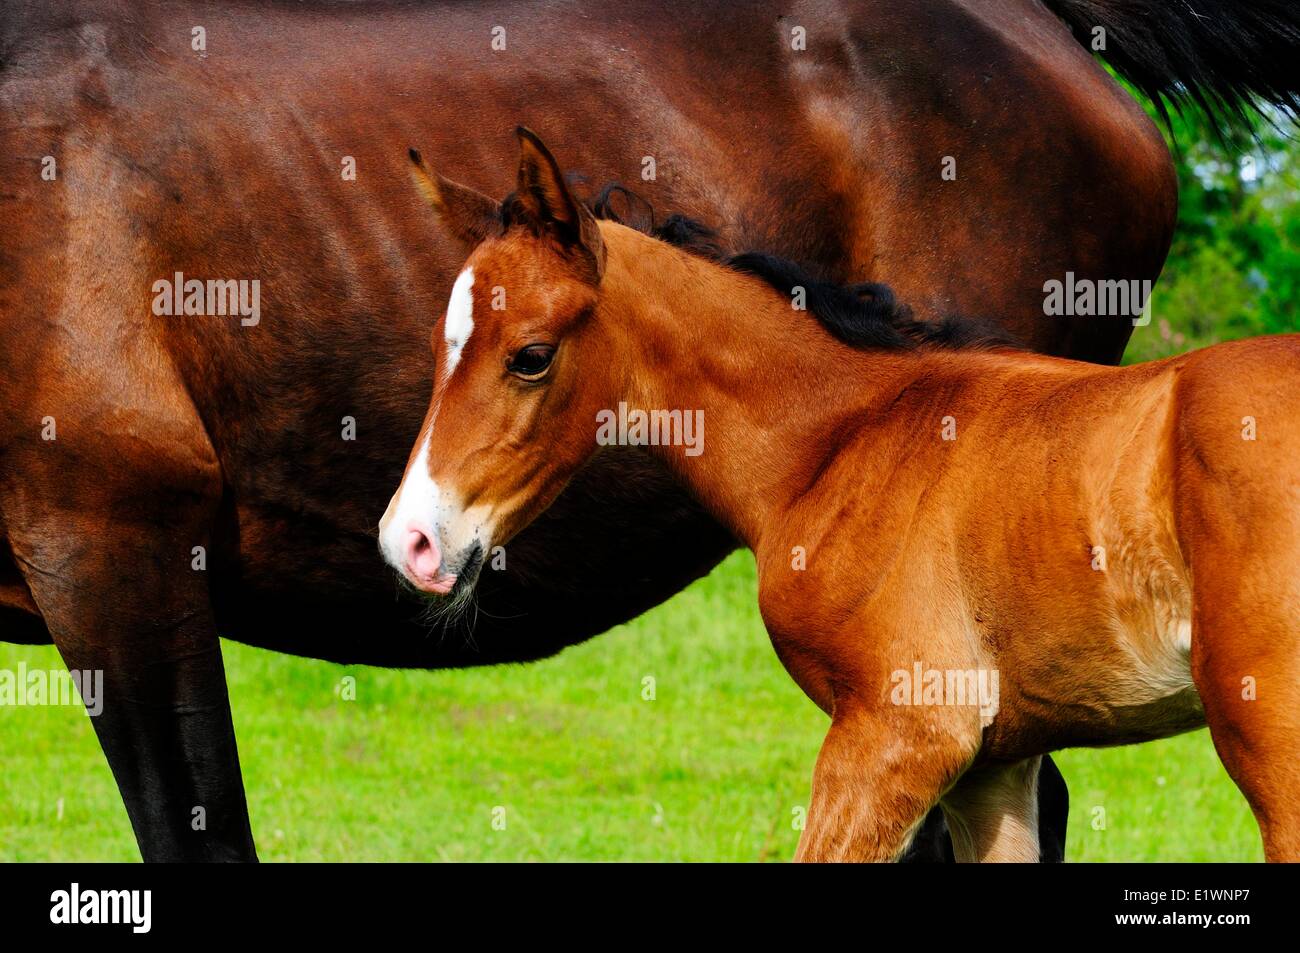 A two week old foal stands beside her mother.  The foal is 1/2 Standard and 1/2 Quarter horse. Stock Photo